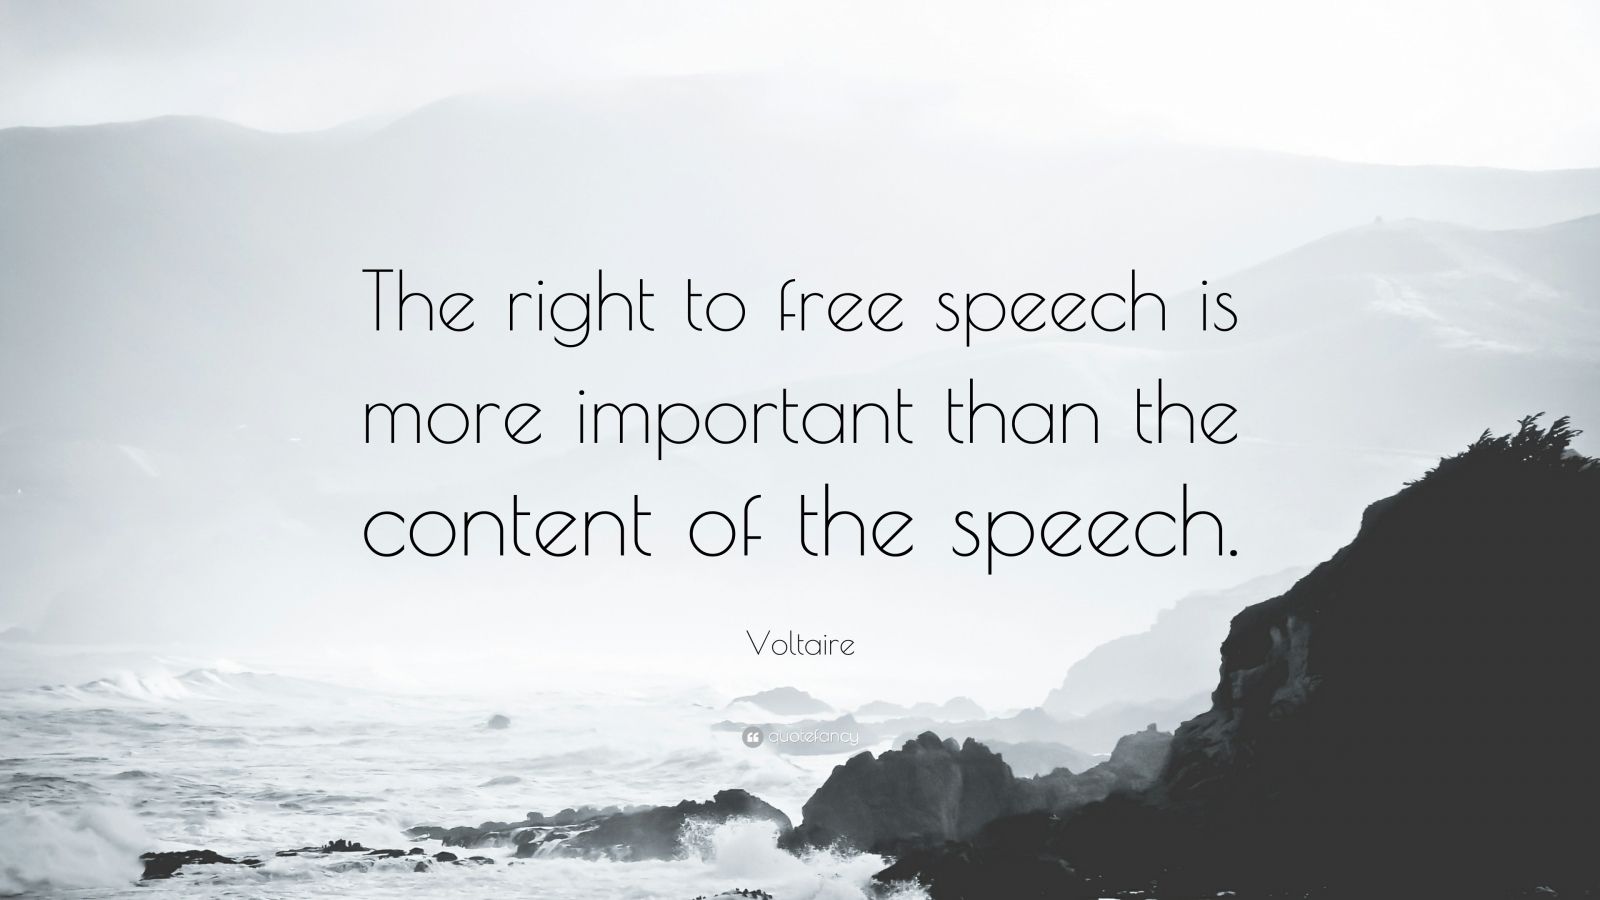 Voltaire Quote: “The right to free speech is more important than the